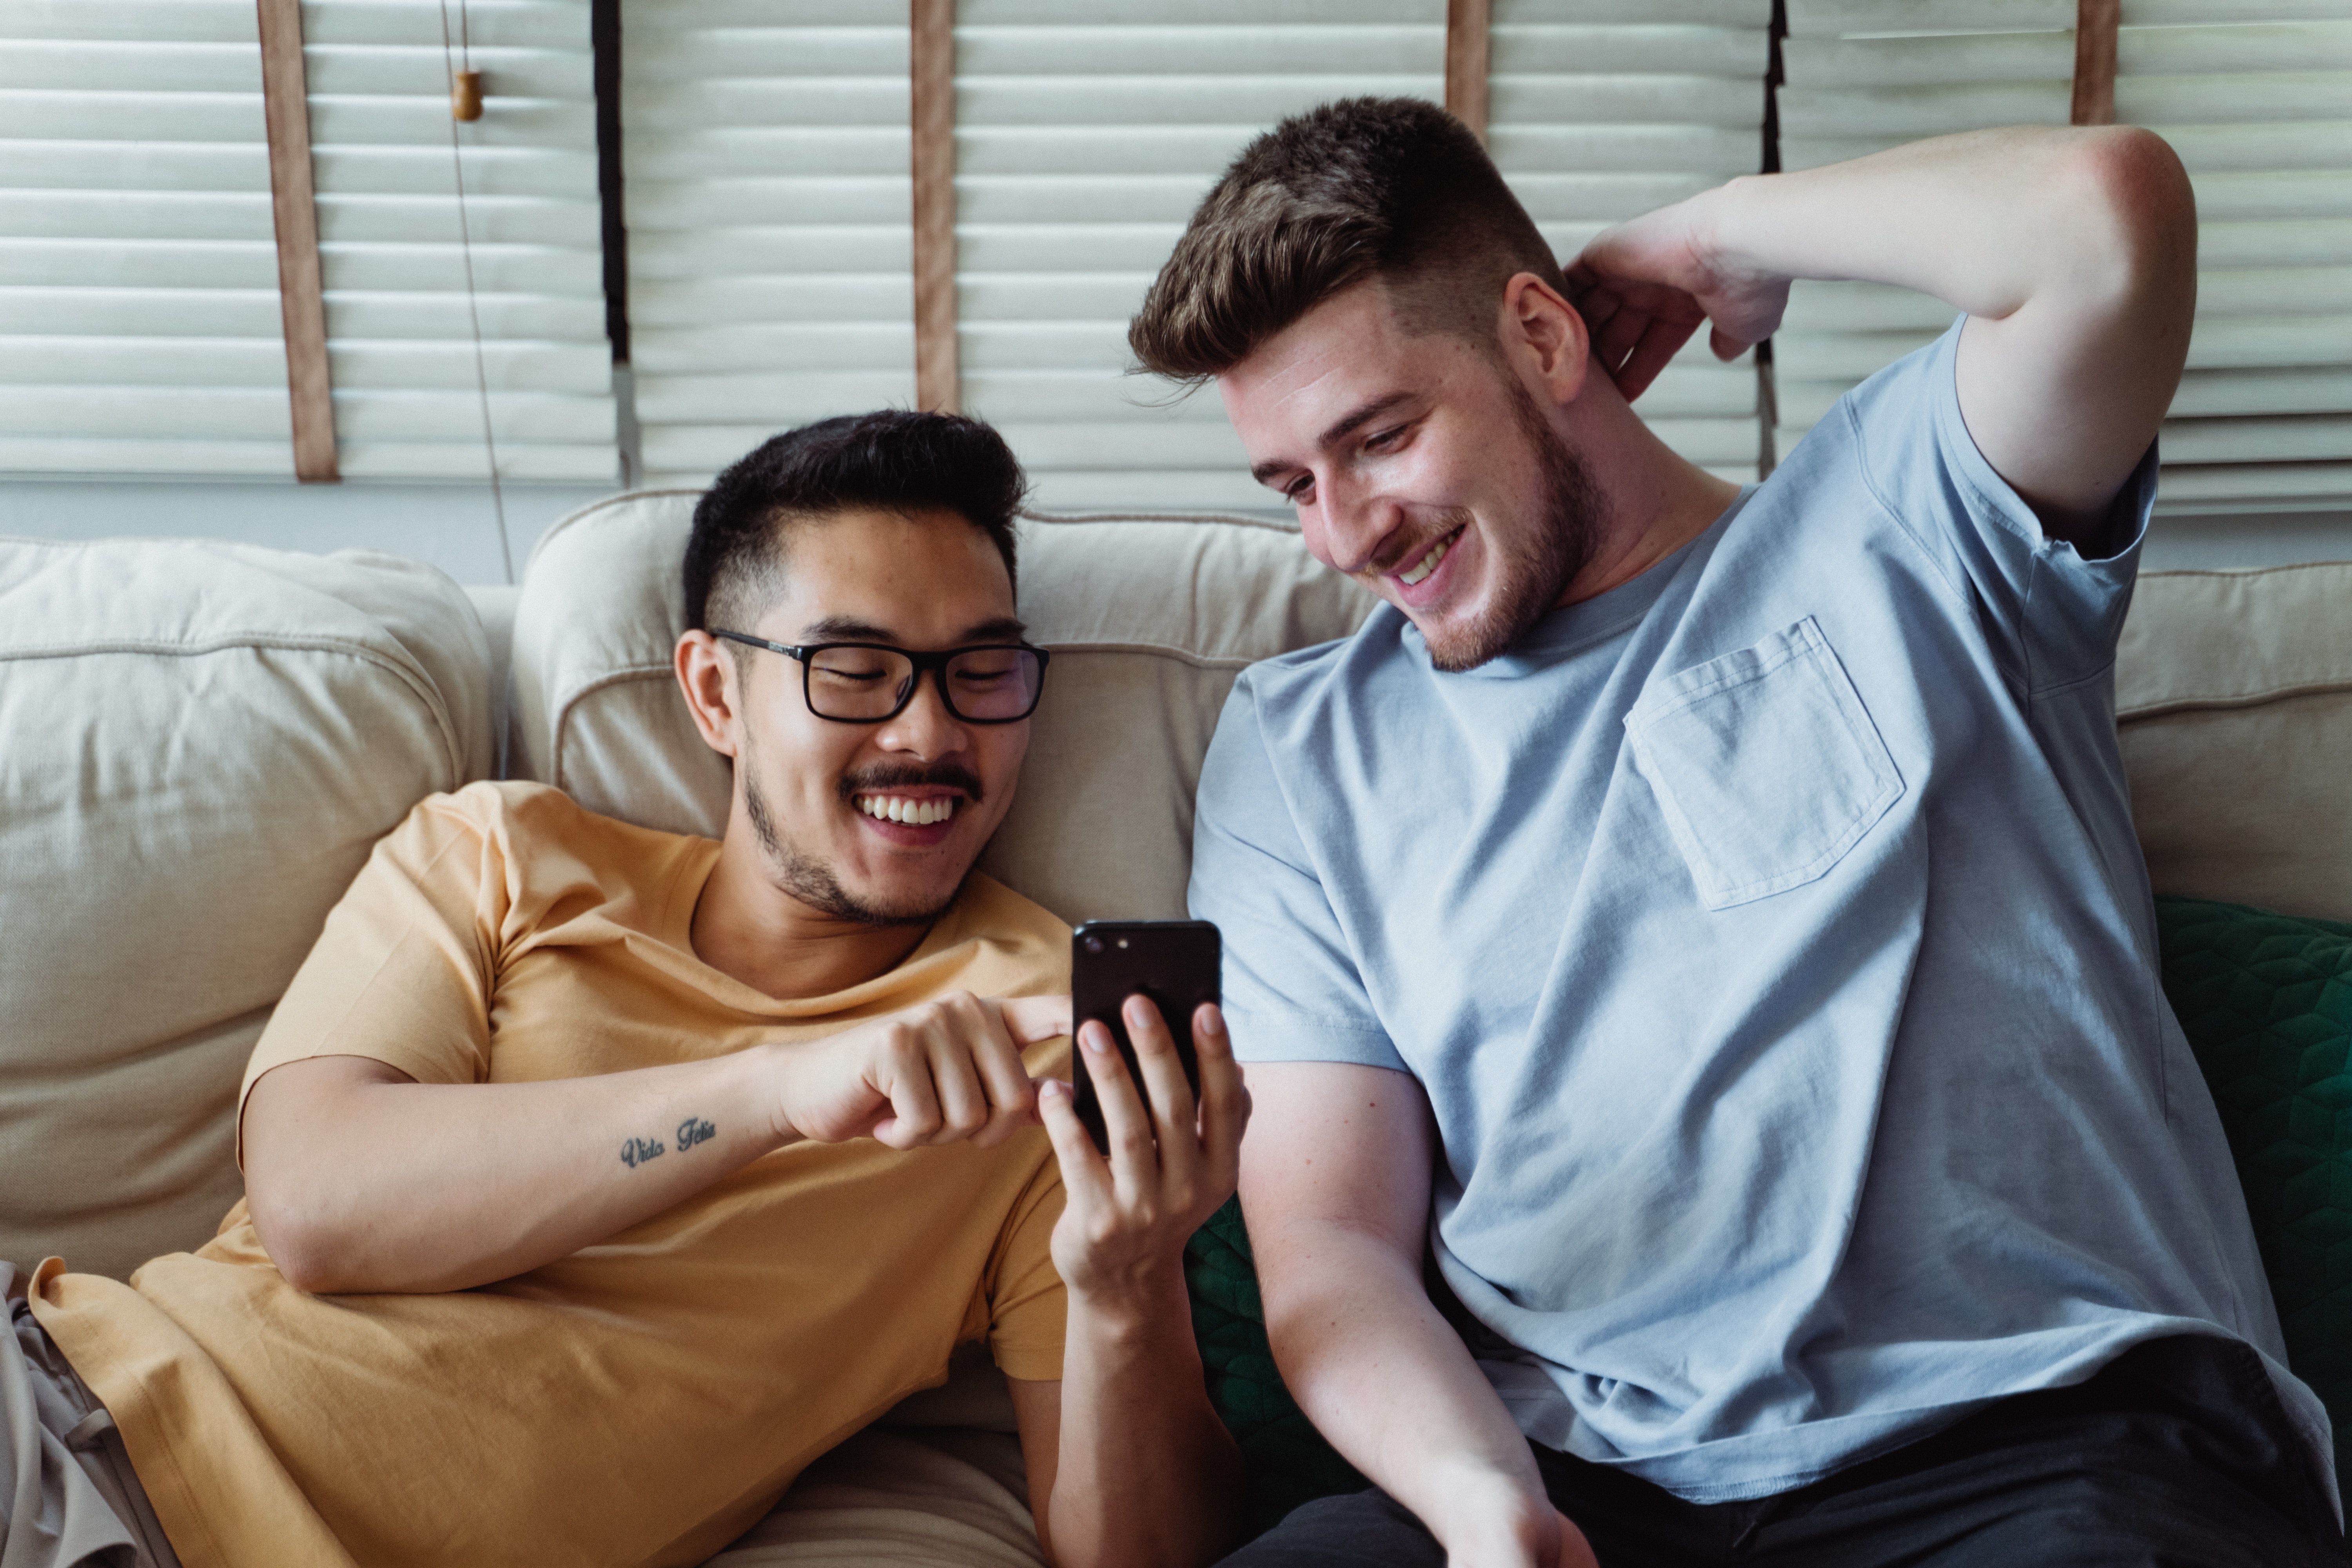 Two guys laugh while looking at a phone together sitting on a couch close to eachother.